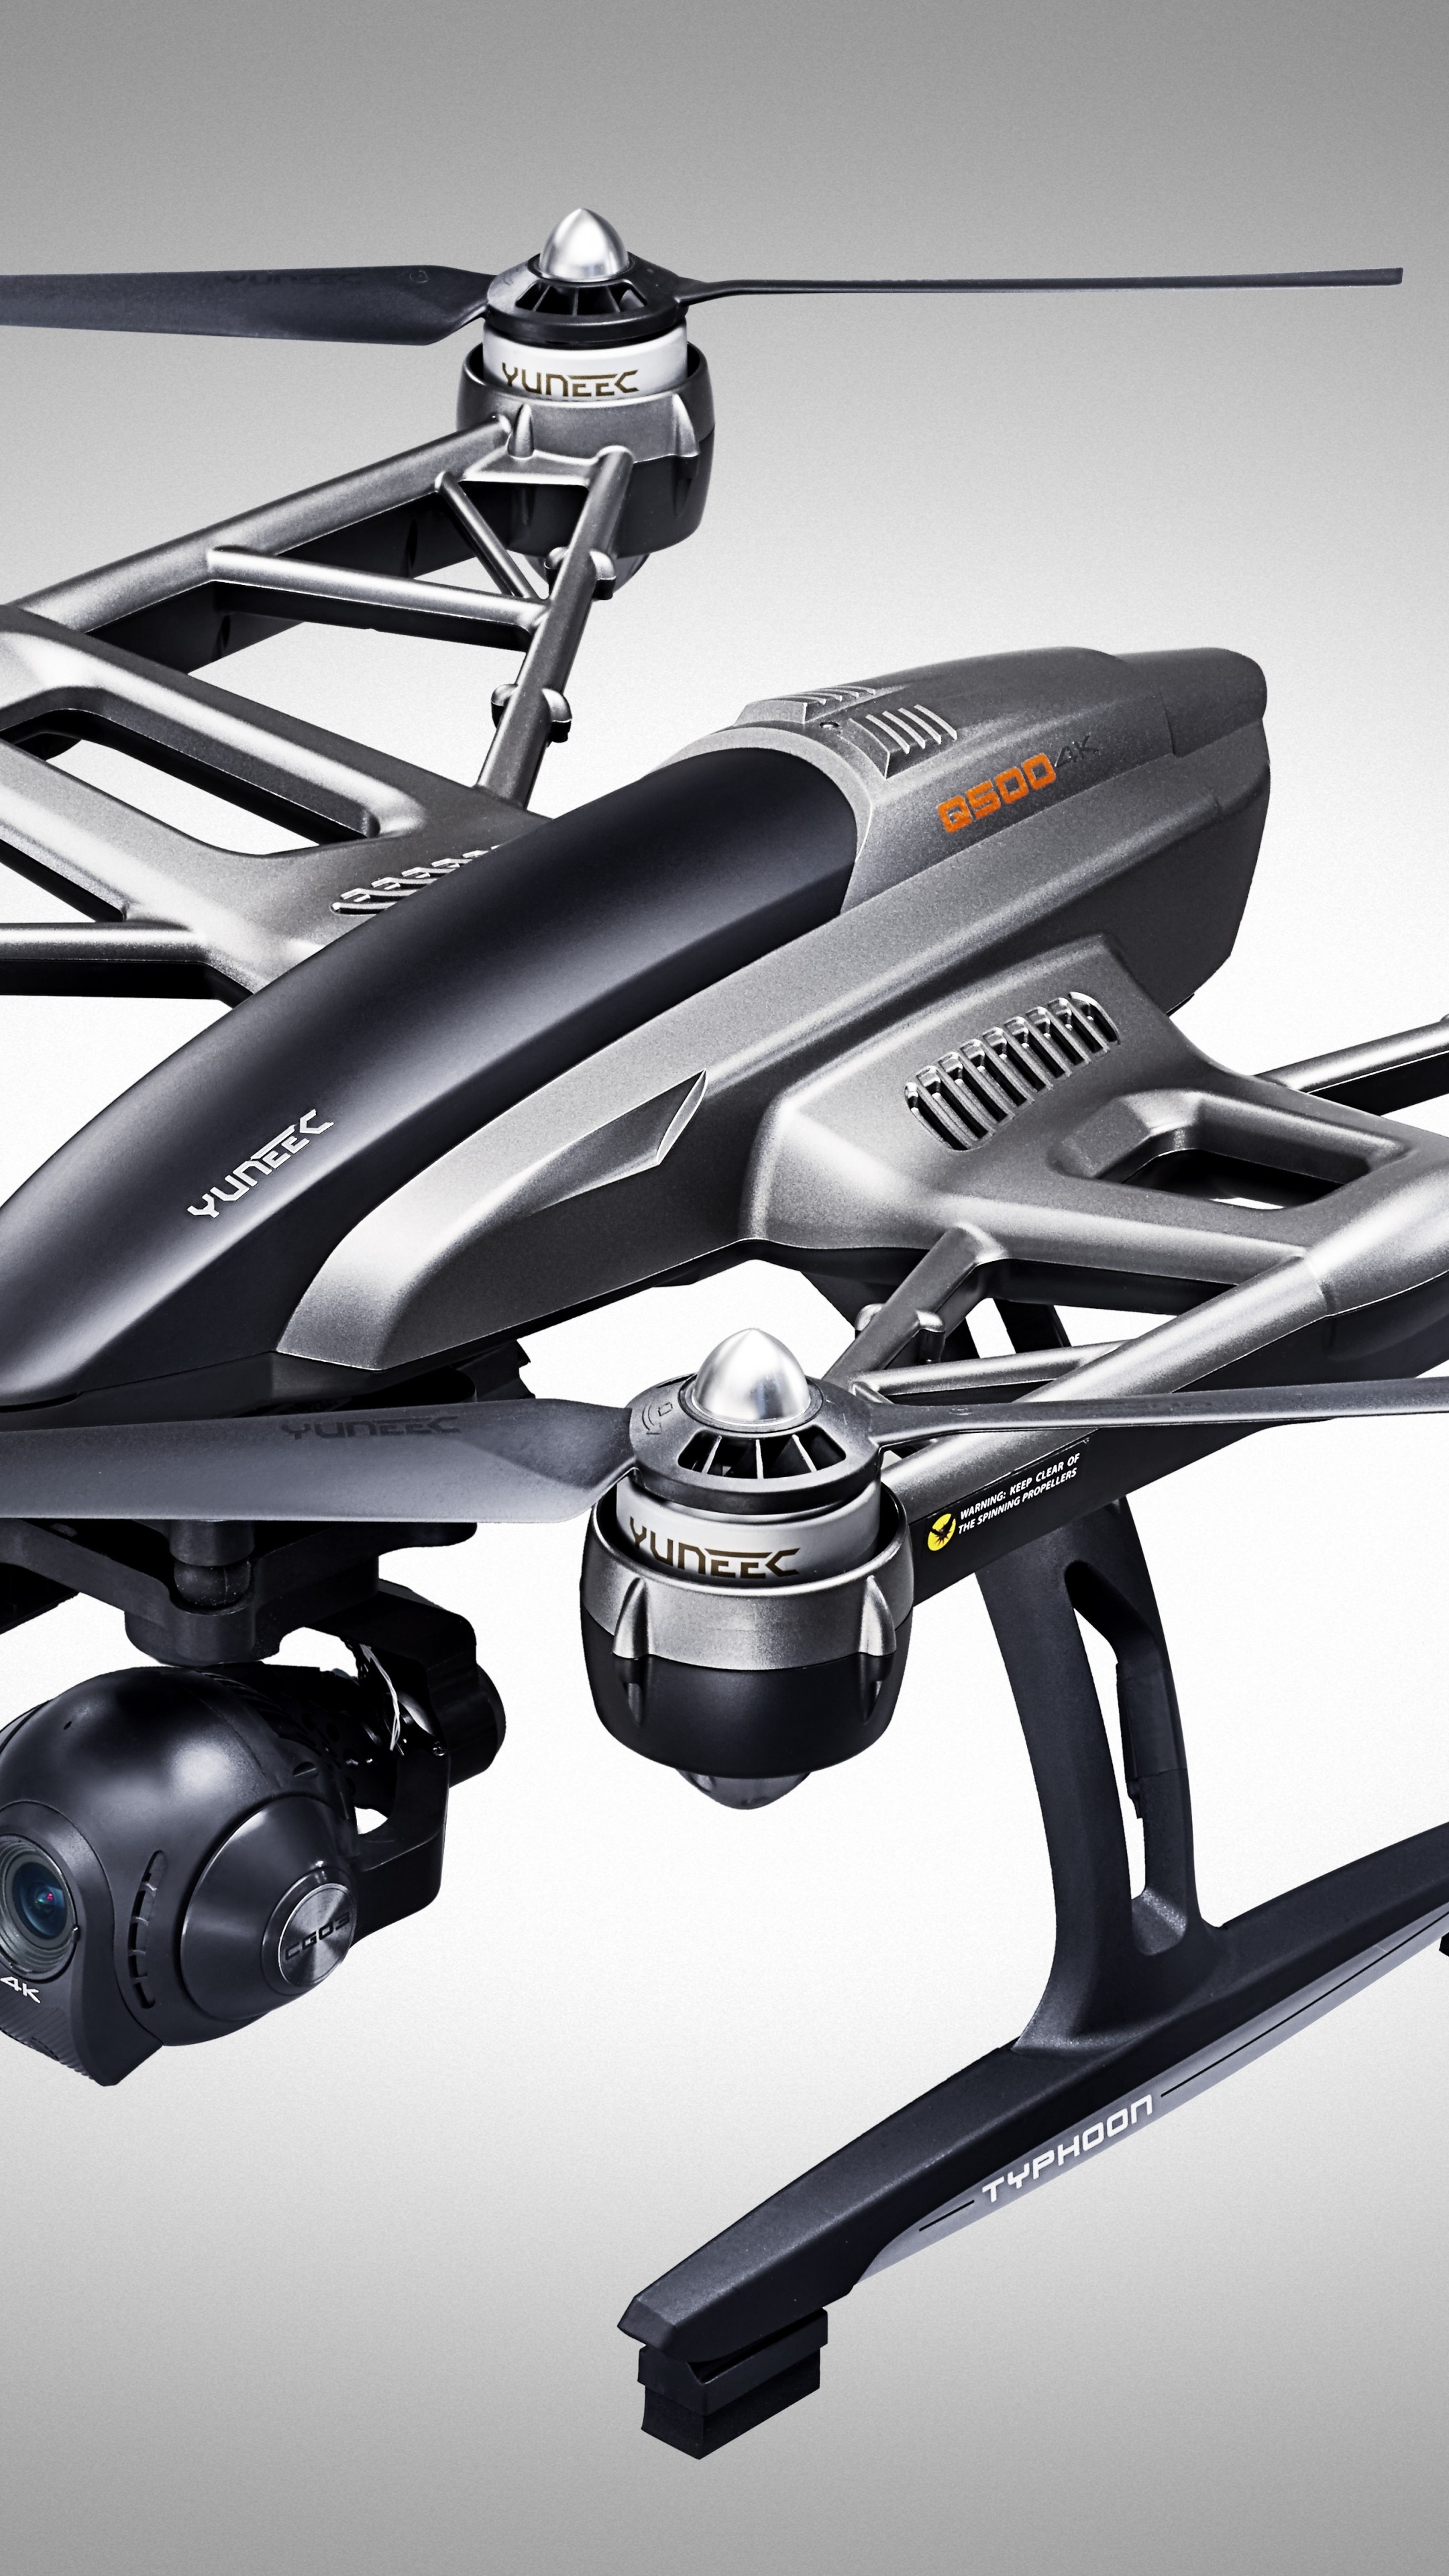 Drone: Yuneec Typhoon H, CES 2016, Quadcopter, Hi-Tech, Quadrotor helicopter. 2160x3840 4K Wallpaper.